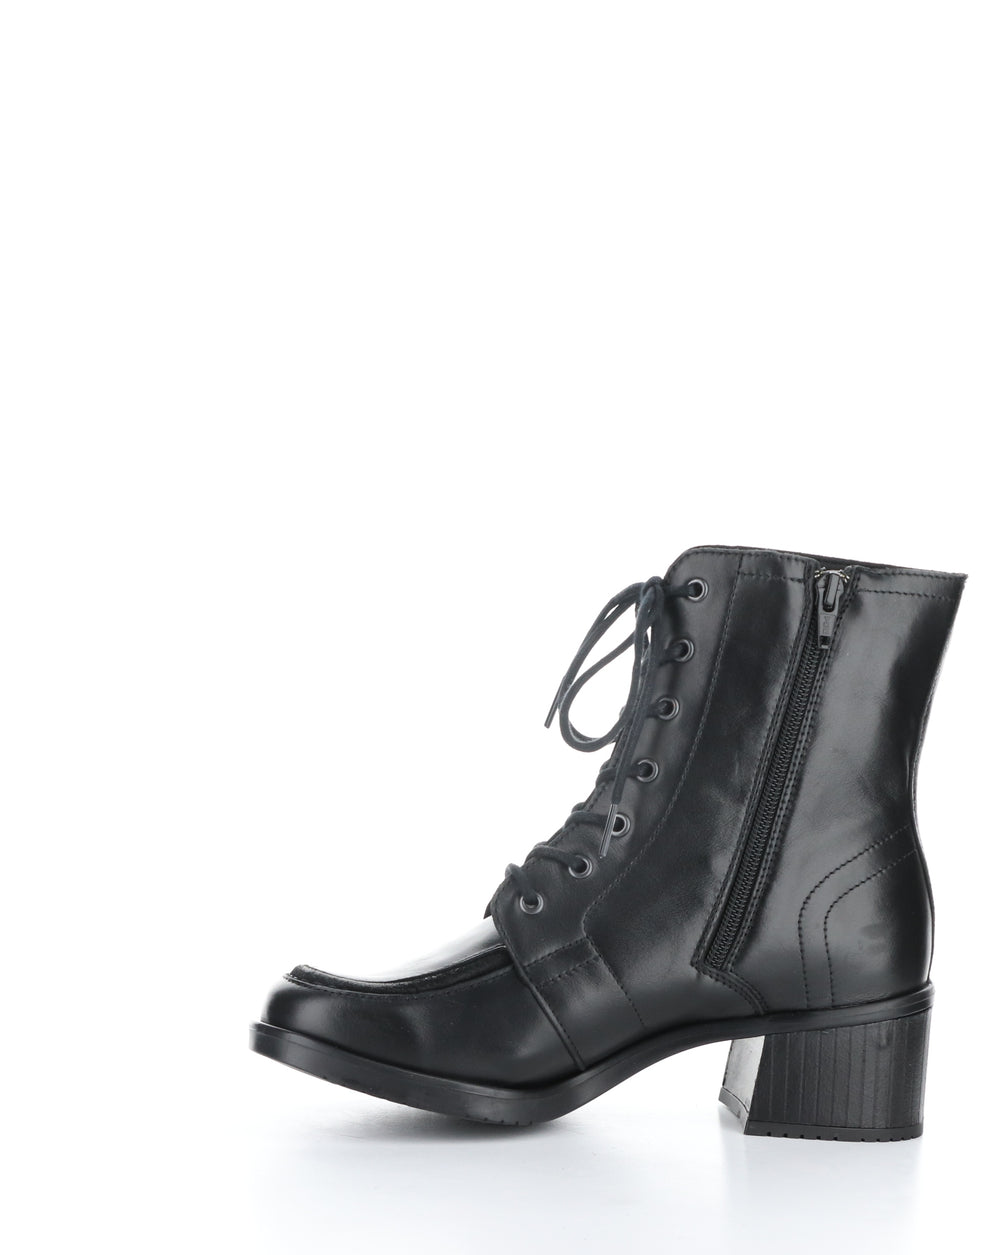 KASS017FLY 000 BLACK Round Toe Boots